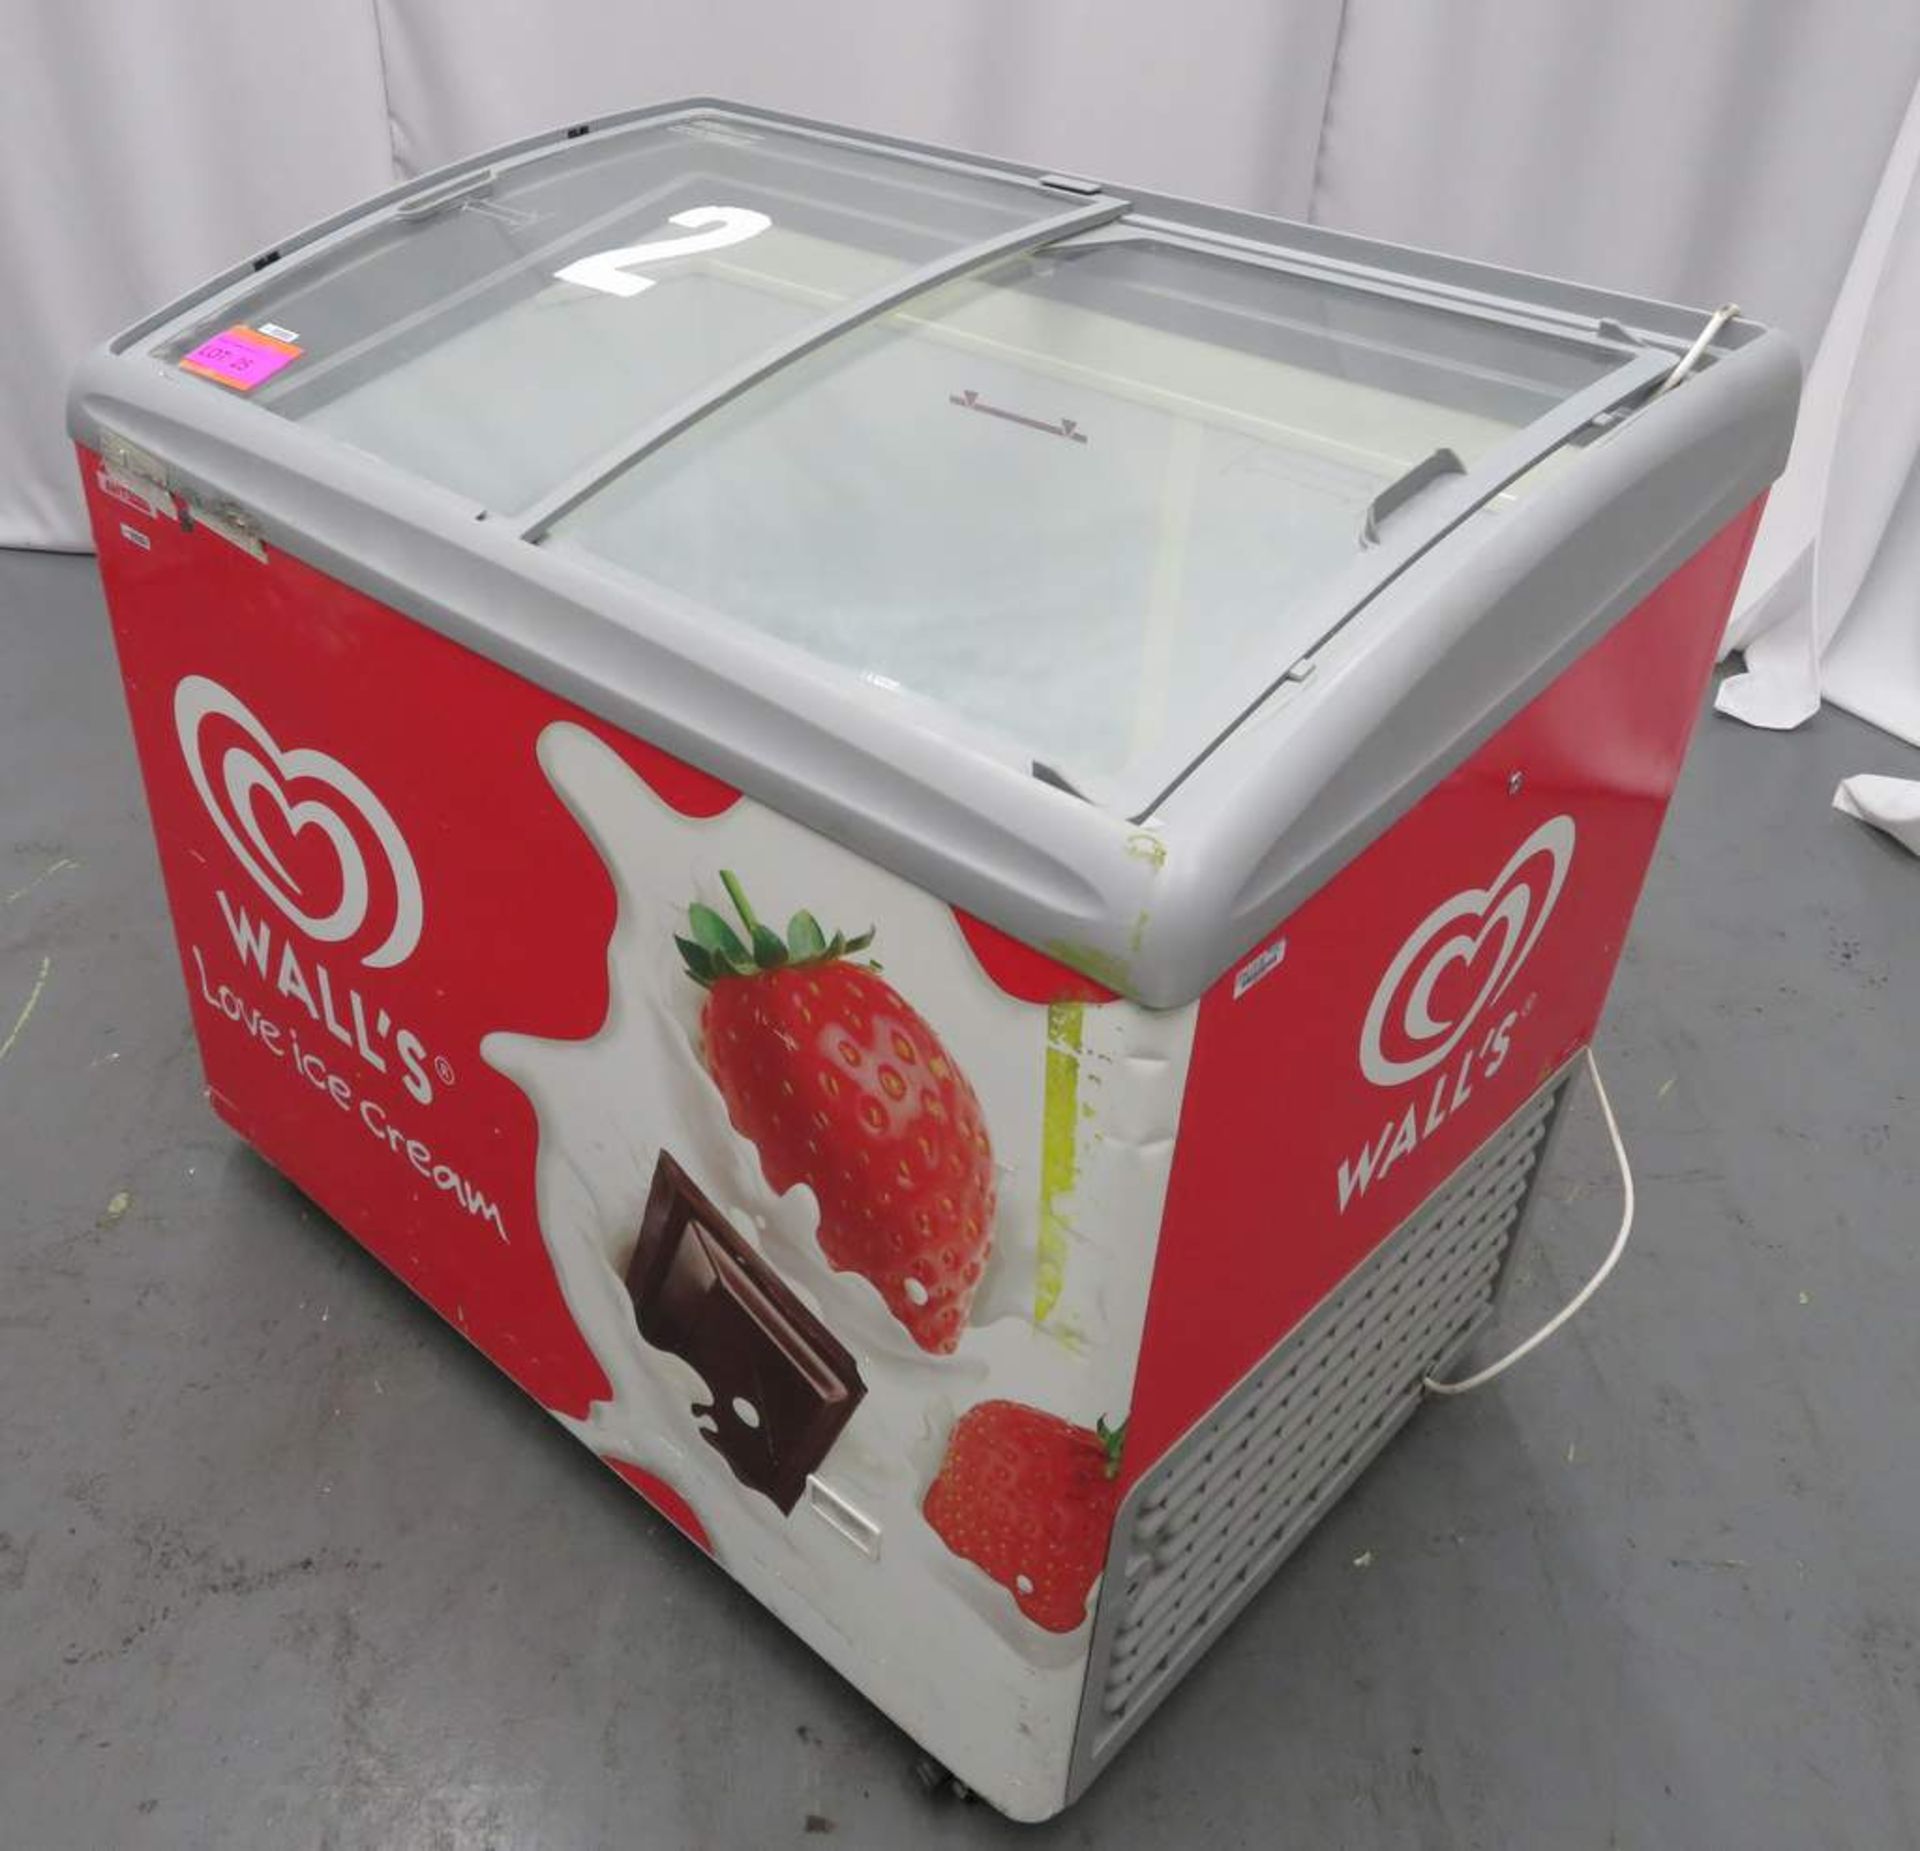 Walls Ice Cream Chiller. Dimensions: 1000x650x880mm (LxWxH) - Image 3 of 7